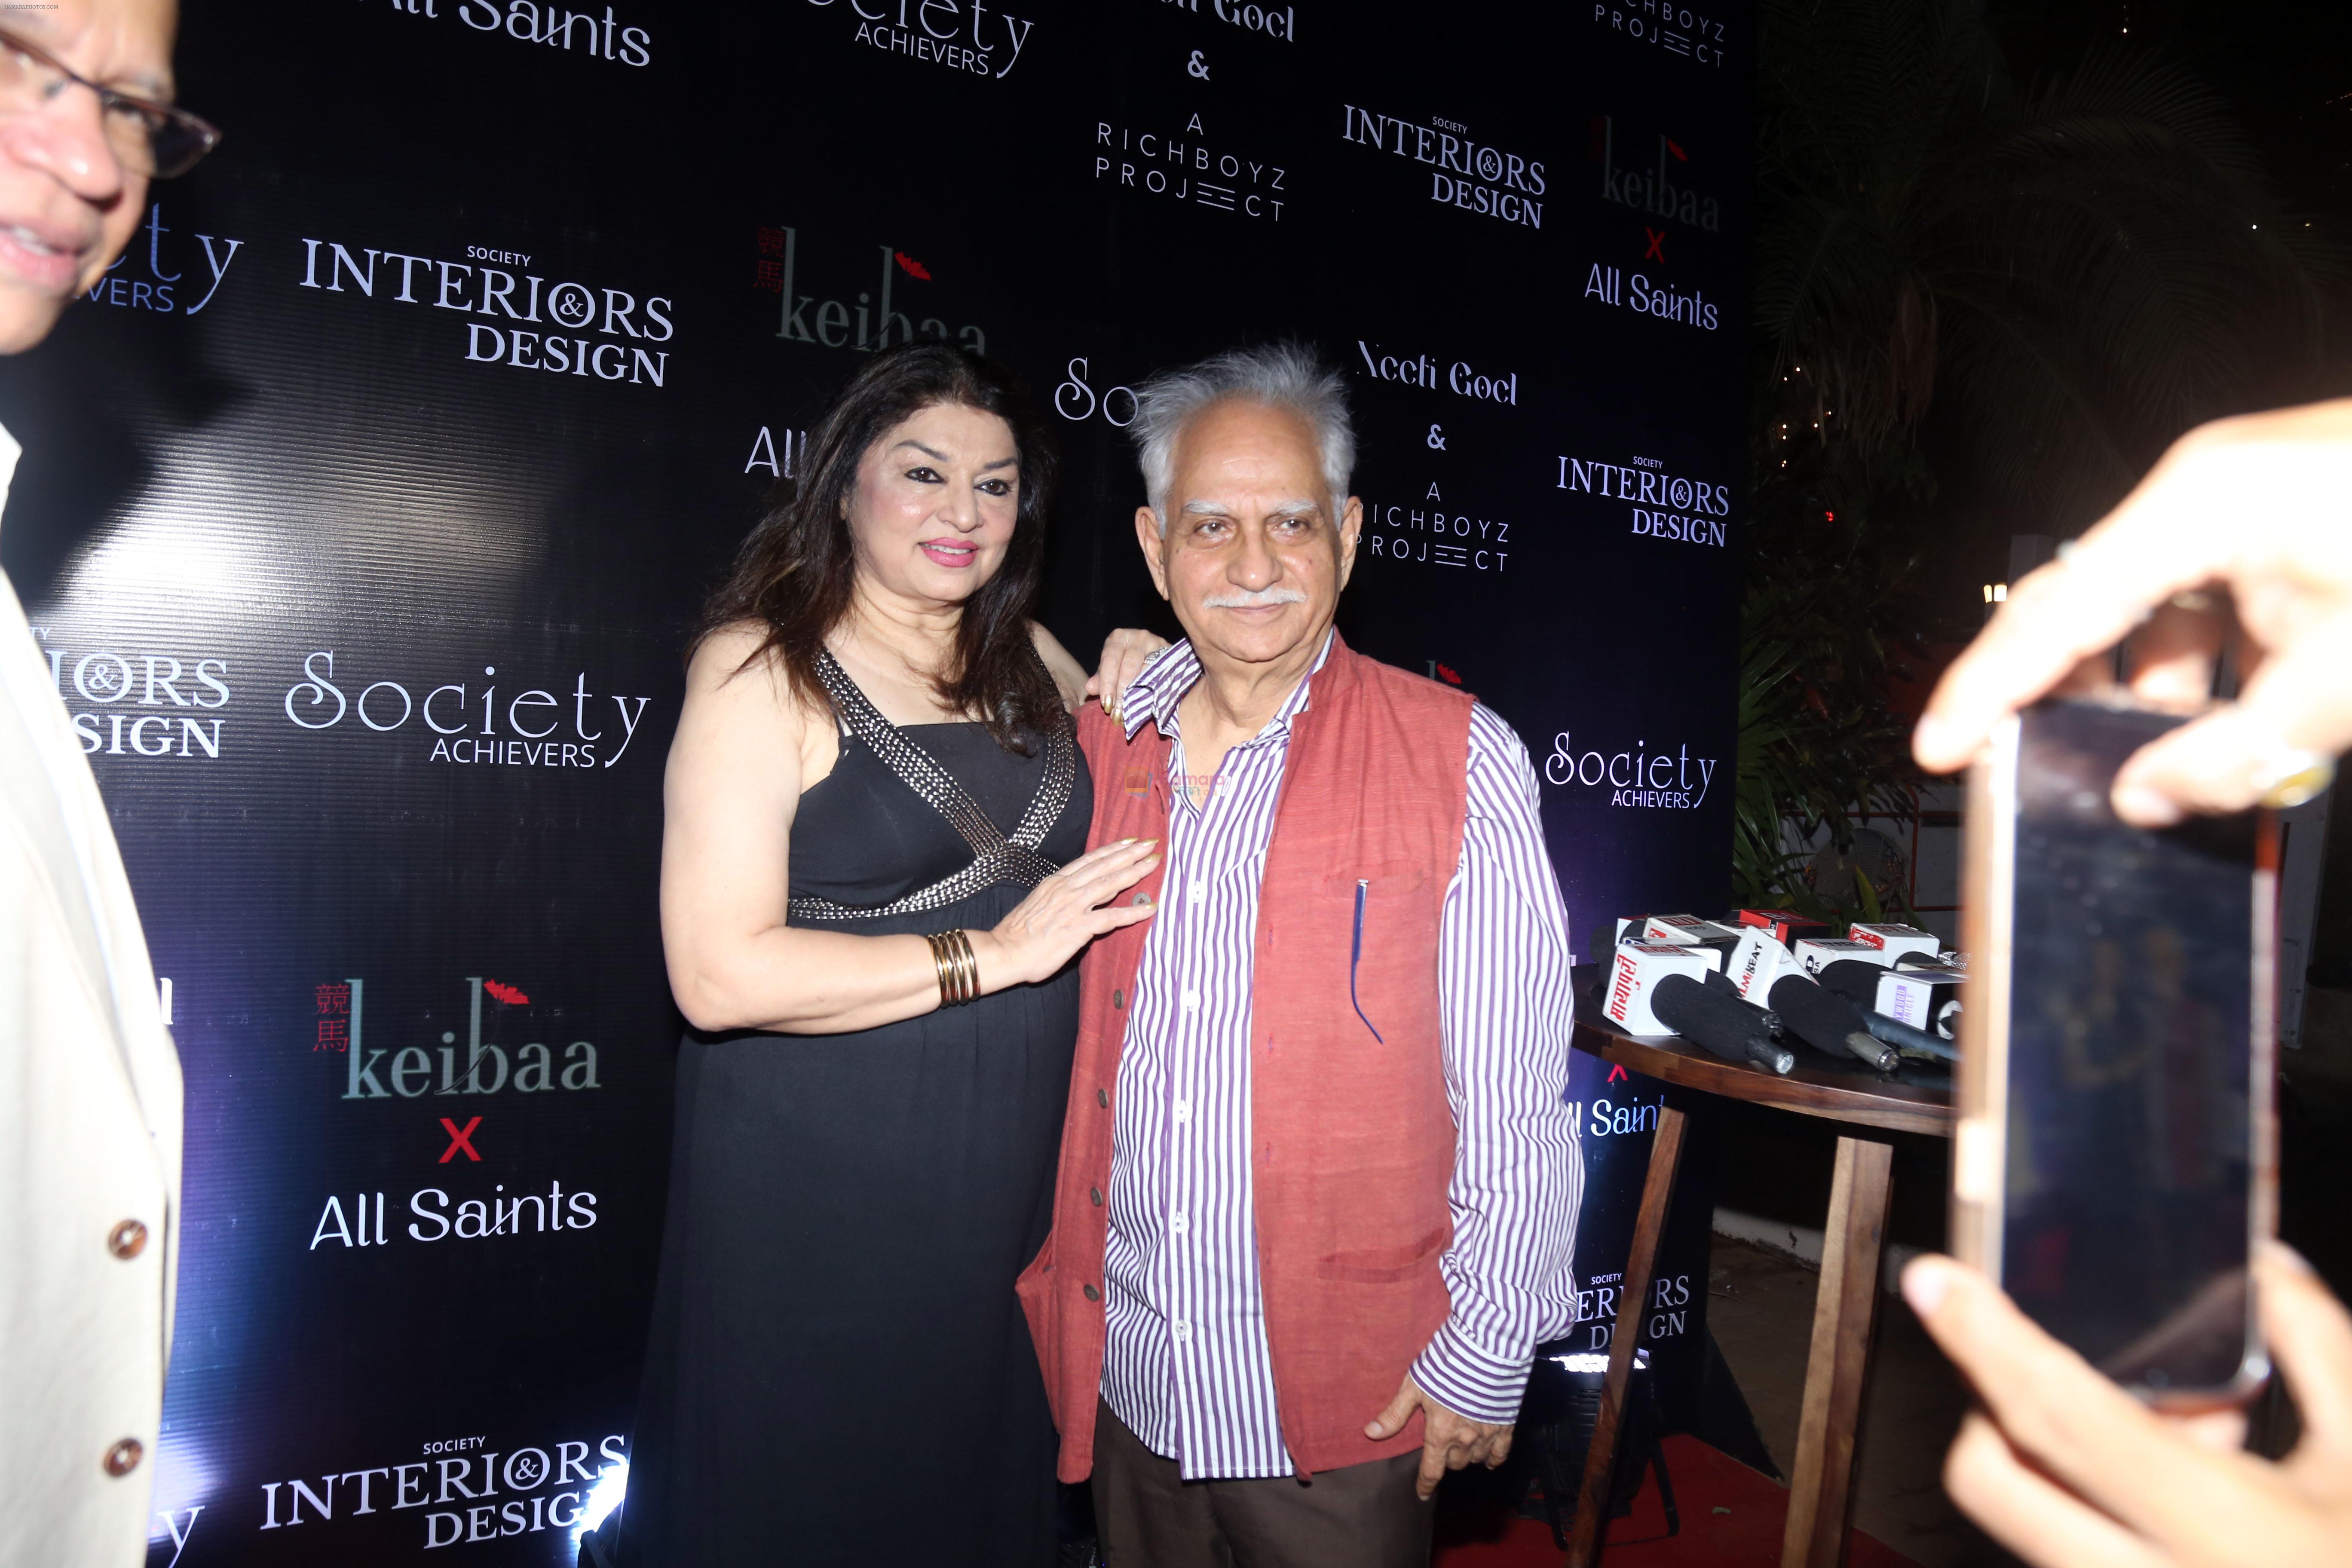 Kiran Juneja with spouse Ramesh Sippy at the ReOpening of Keibaa X All Saints and Celebration of Society Achievers and Society Interiors and Design Magazine